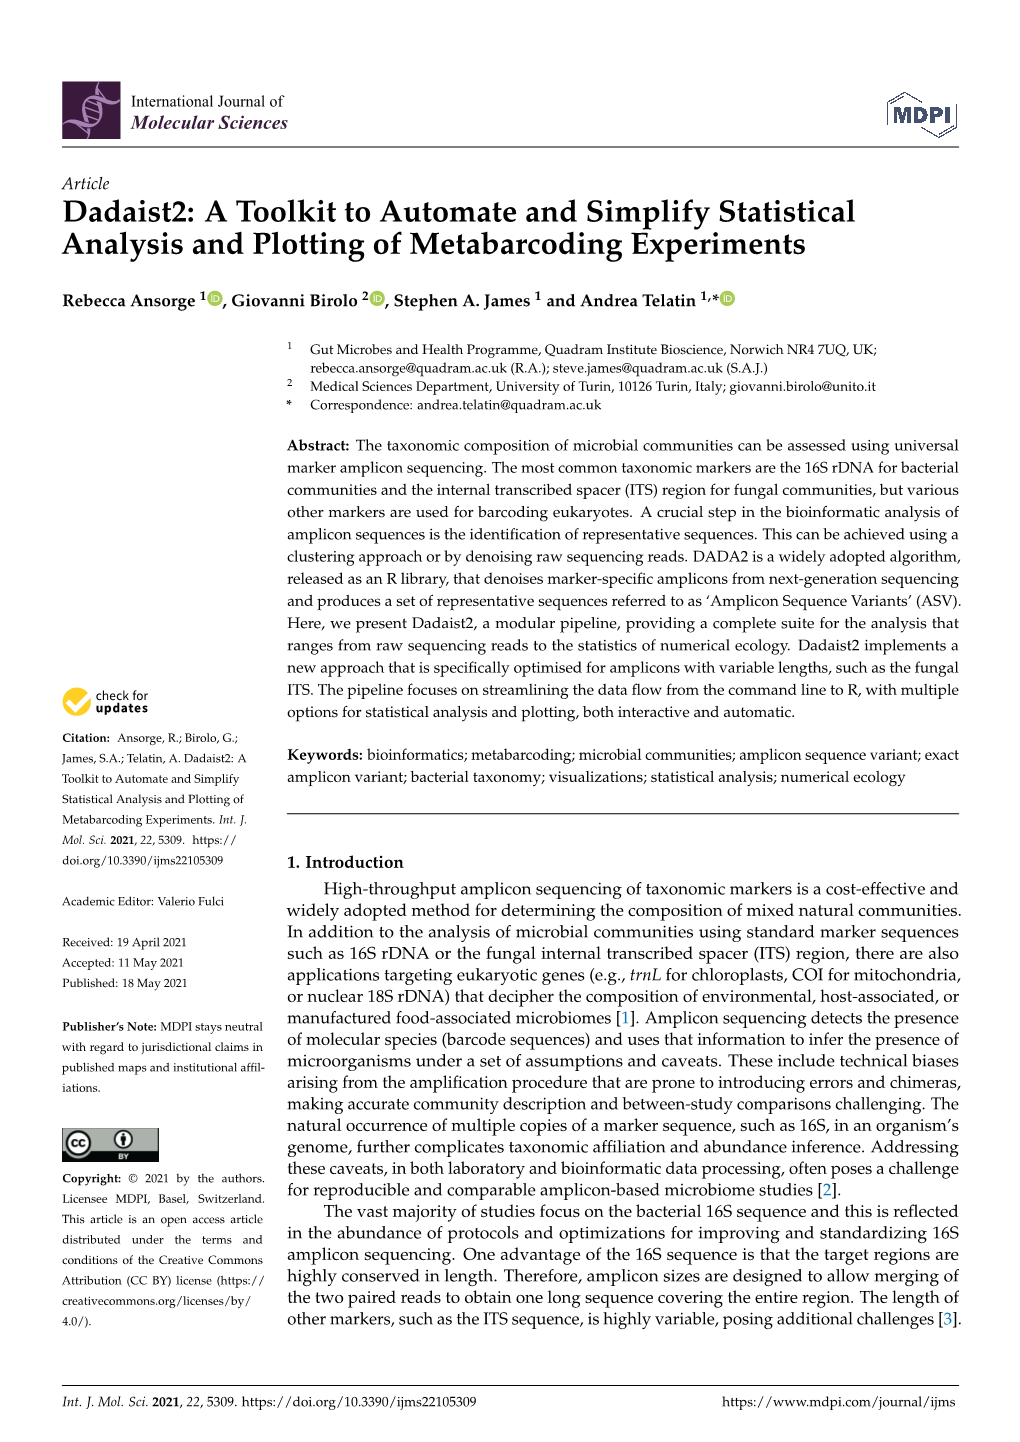 A Toolkit to Automate and Simplify Statistical Analysis and Plotting of Metabarcoding Experiments